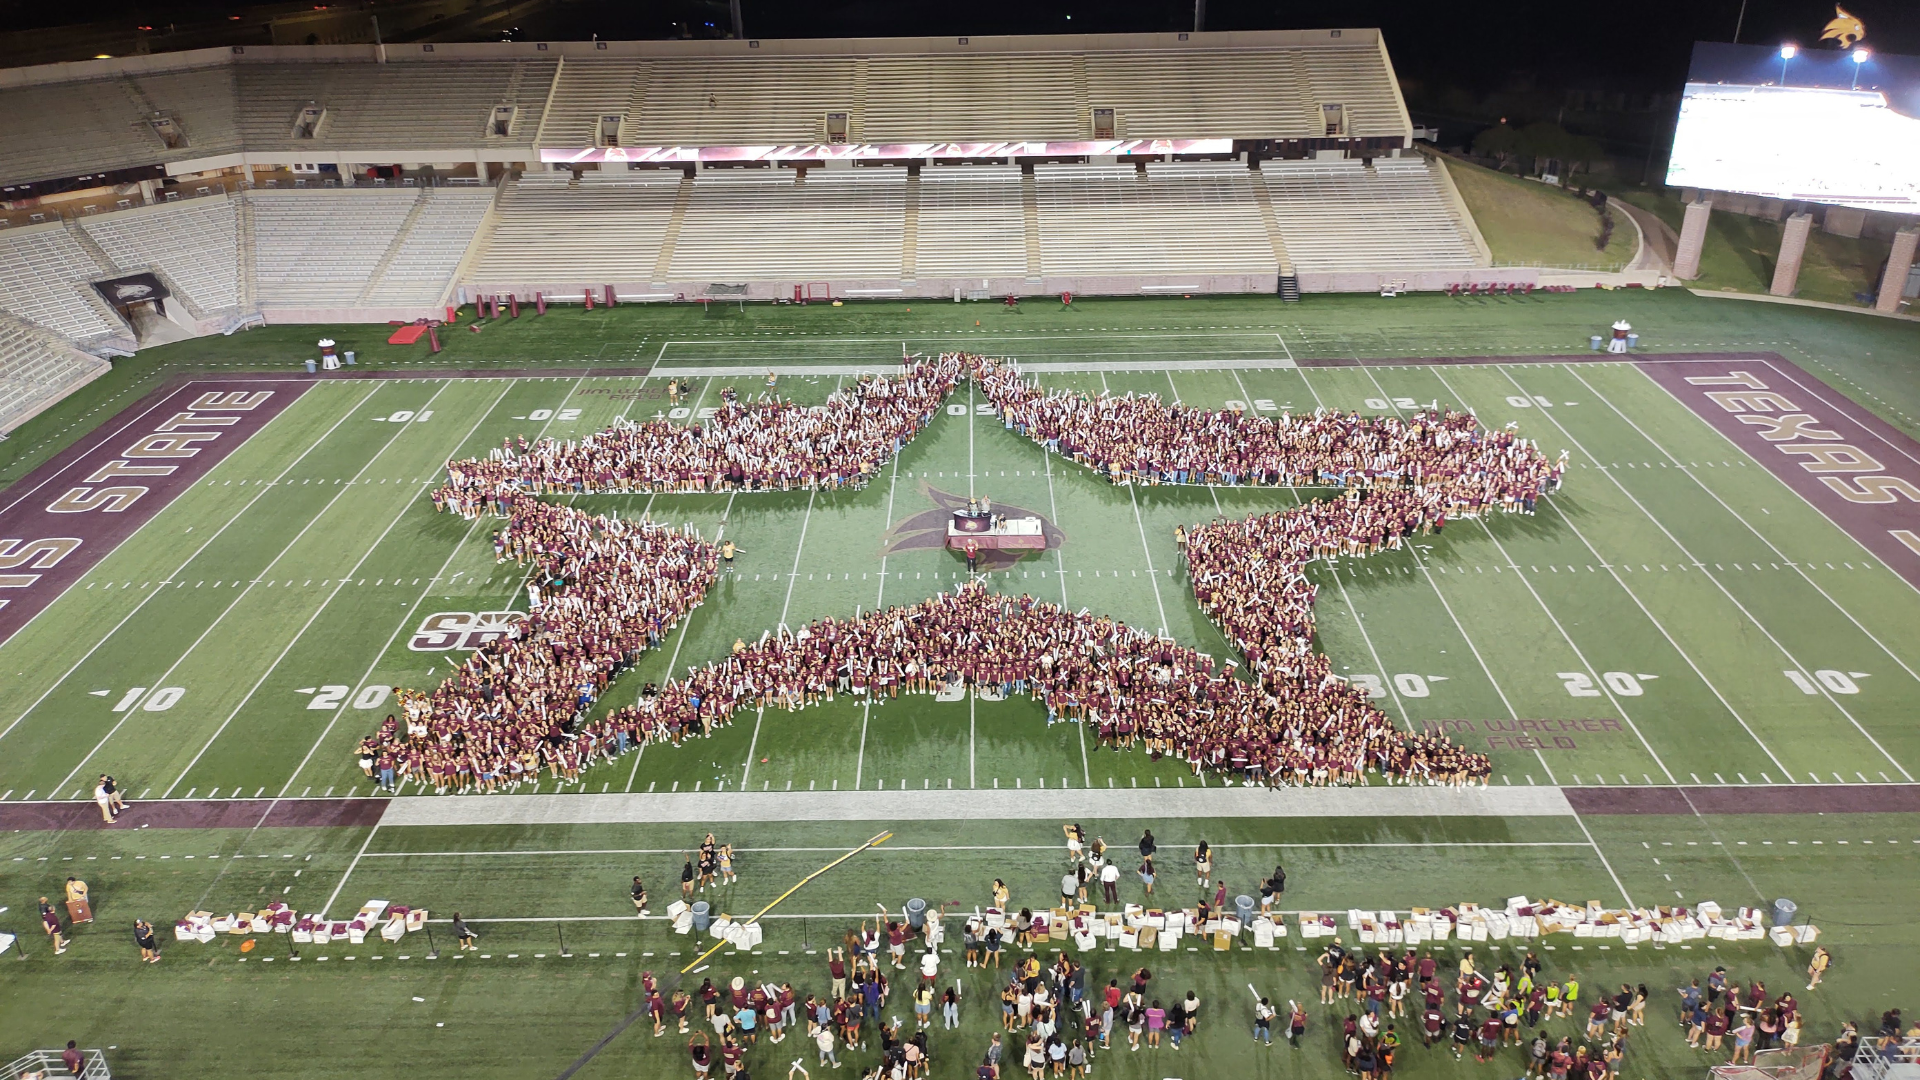 Texas State University Class of 2027 on Bobcat Stadium field in the shape of a star